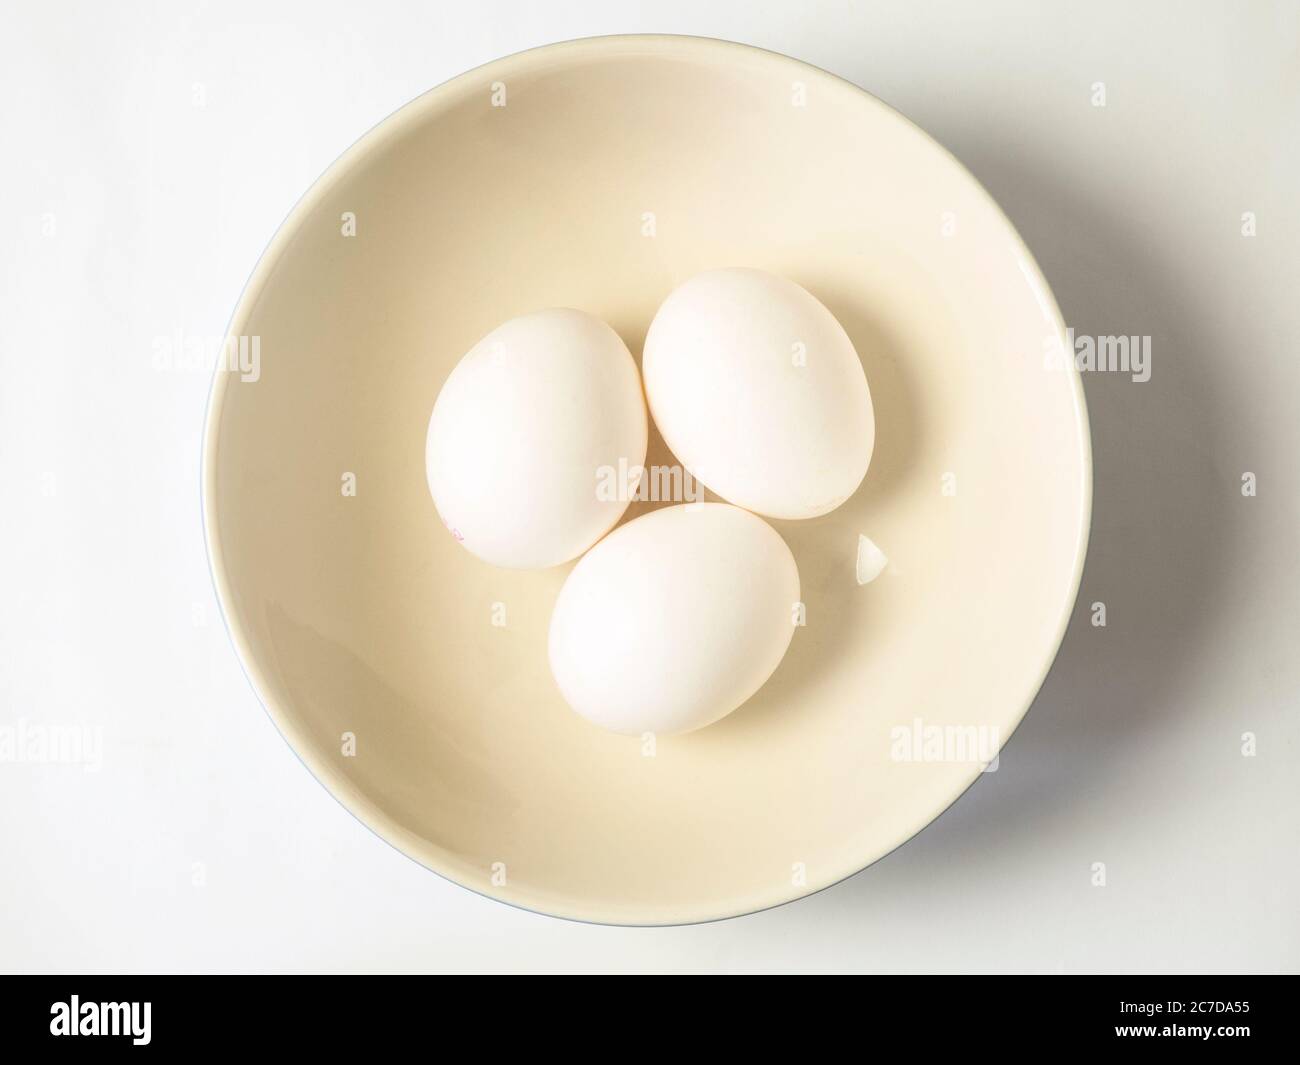 Three white eggs in a bowl centred on a white background Stock Photo